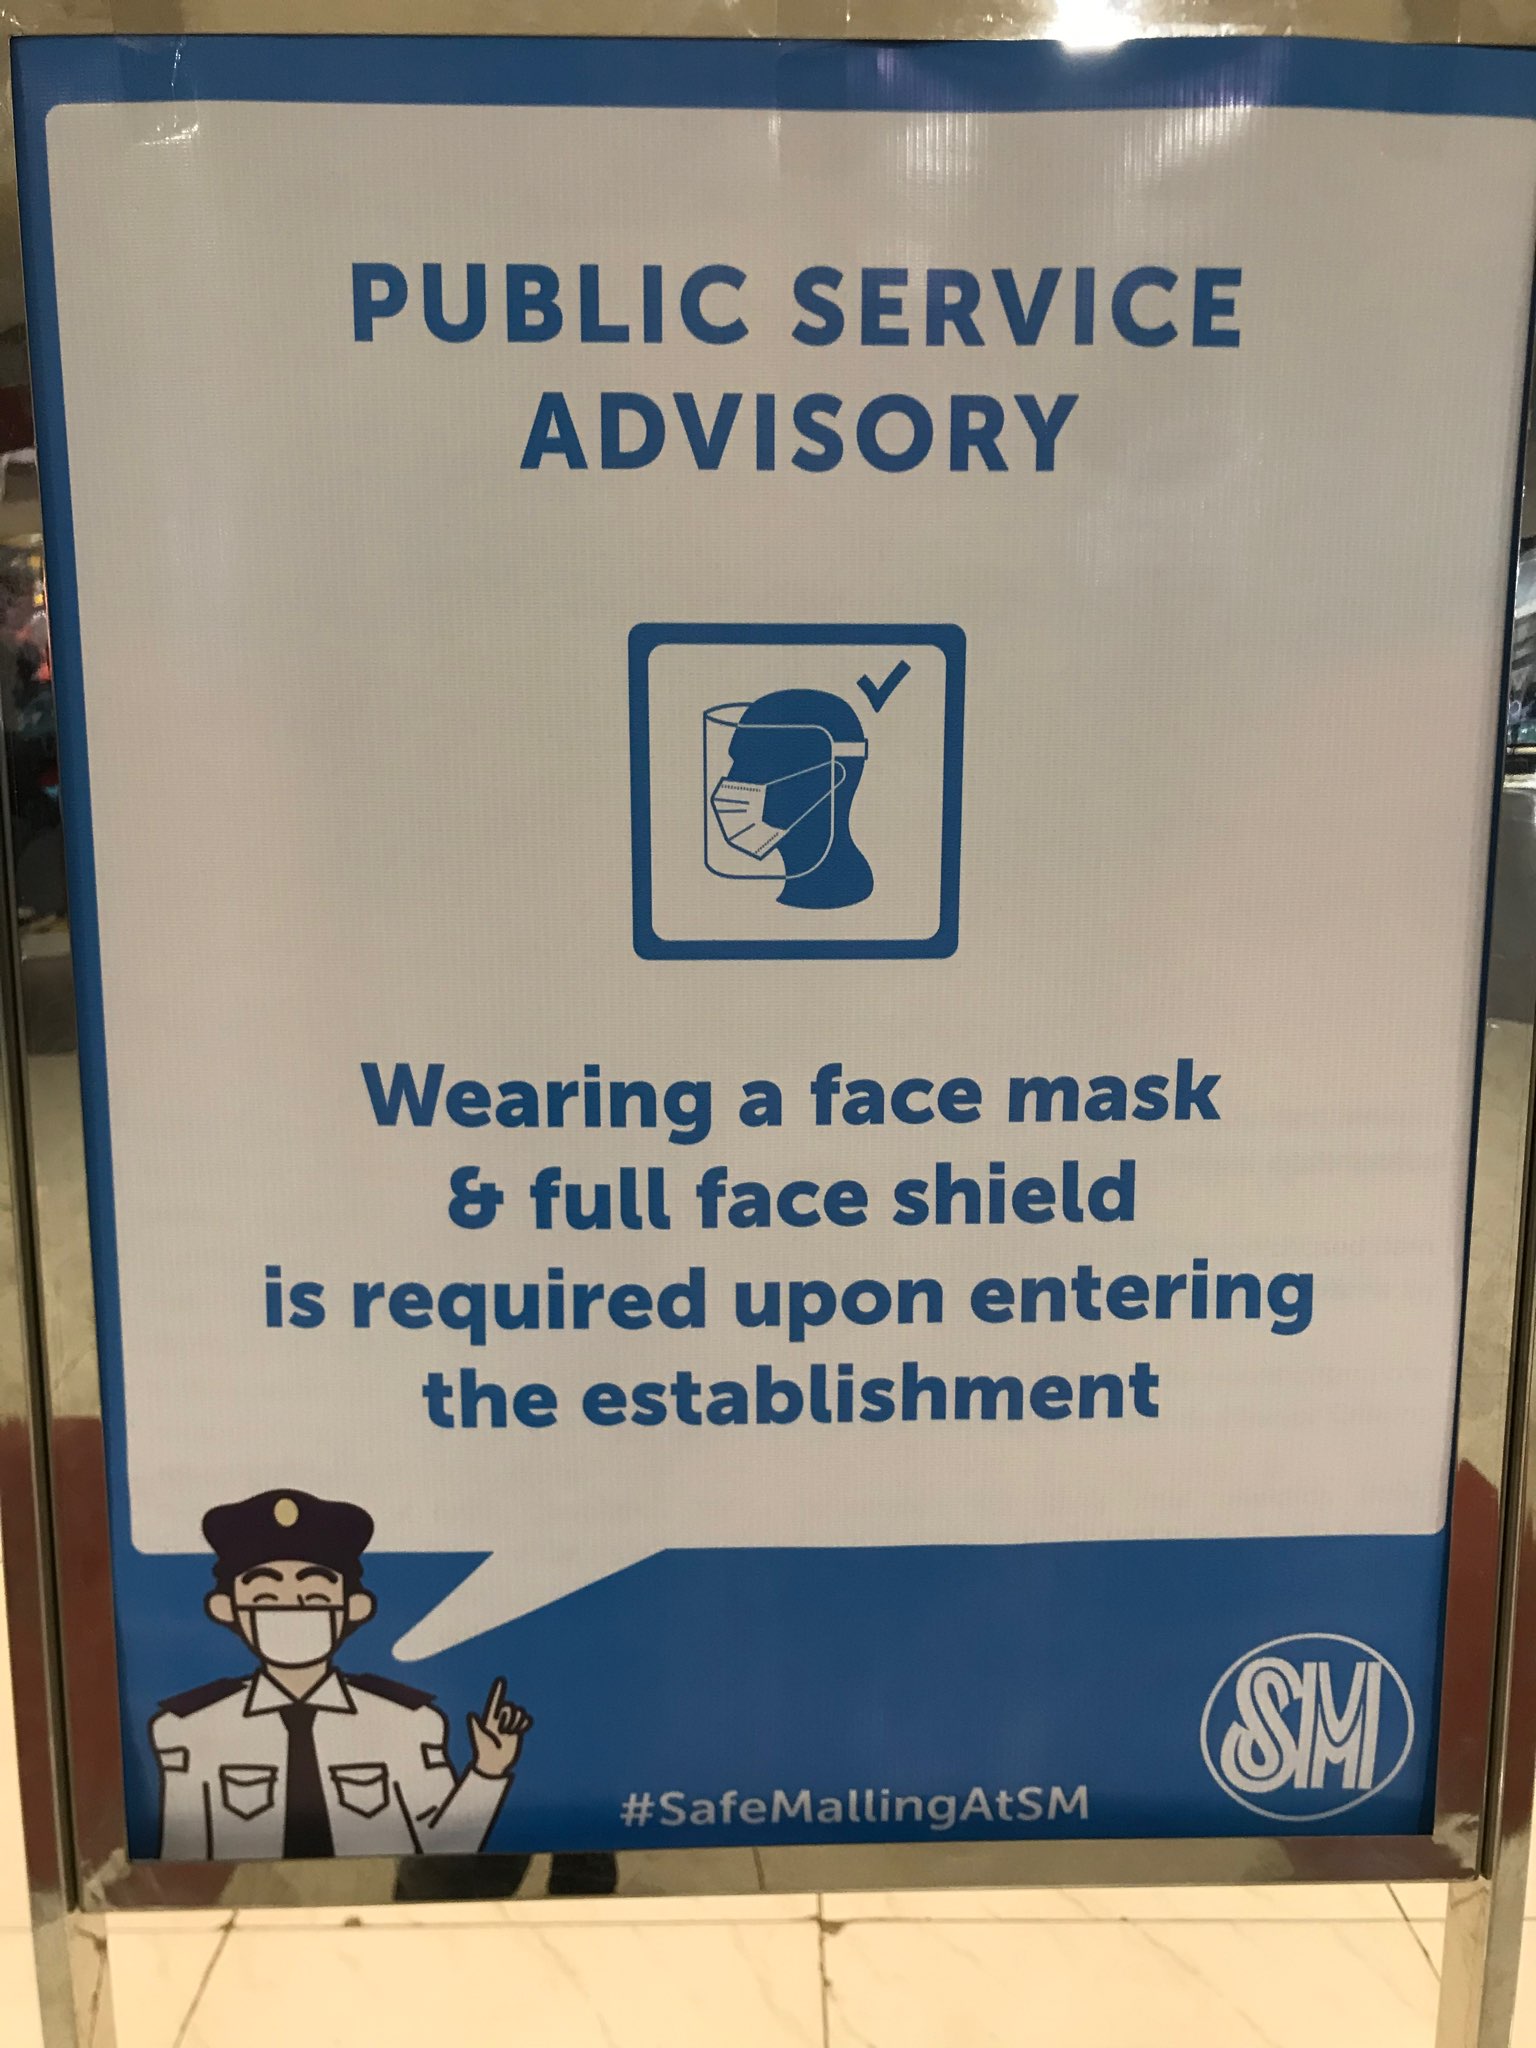 Every mall in Cebu City is observing the health protocols given by the Inter-Agency Task Force (IATF) during this Covid-19 Pandemic. Shopping under the new normal could be quite a hassle for most, but it is for the health and safety of all. Here are some of the basic protocols when entering malls:
1. No face mask and face shield, No entry.
2. Body temperature will be checked, and hands will be sanitized upon entry. 
3. Children below 15 years old and senior citizens above 65 are not allowed to enter malls.
4. Always observe social distancing inside the mall. (at least 1-2 meters apart)
5. Contact tracing is required when entering the shops, the supermarket and the department store. 
6. Cashless transactions (card, Gcash, etc.) are not required but encouraged.
7. In food courts, only 2 persons are allowed per table. Only families can sit together in 1 table as a group. 
8. Gaming areas such as Timezone (Ayala) and Bibo (SM) are still closed for operation.

Shopping during the pandemic may not be as relaxed as before, but there are also positive things that come out of this, such as BIG SALE everywhere! Almost every shop has gone on sale ever since the pandemic started. This is one way to help revive the economy. So, check that bag you’ve been wanting to buy! It might be on sale now! 
However, as much as possible, everyone is encouraged to only visit the mall when necessary. Safety should still be our number 1 priority!
(* Information as of January 7, 2021)